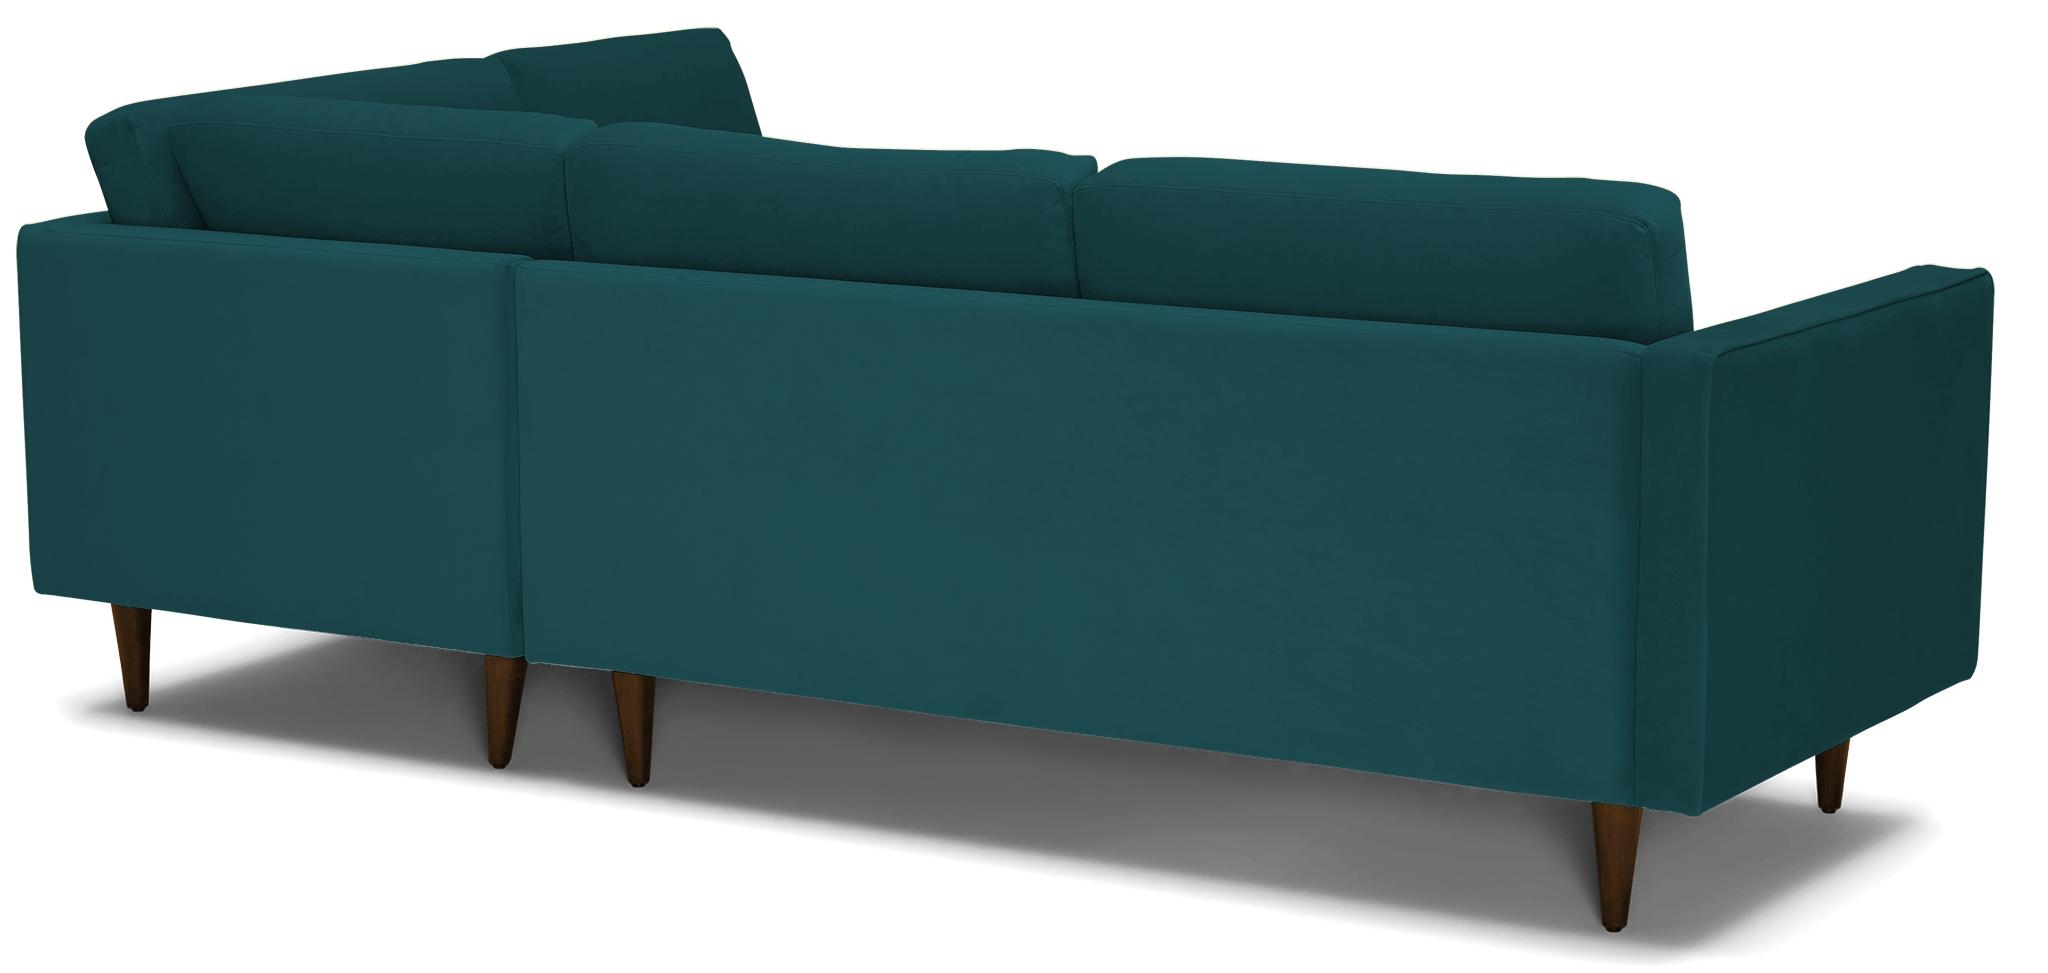 Blue Briar Mid Century Modern Sectional with Bumper - Royale Peacock - Mocha - Left - Image 4